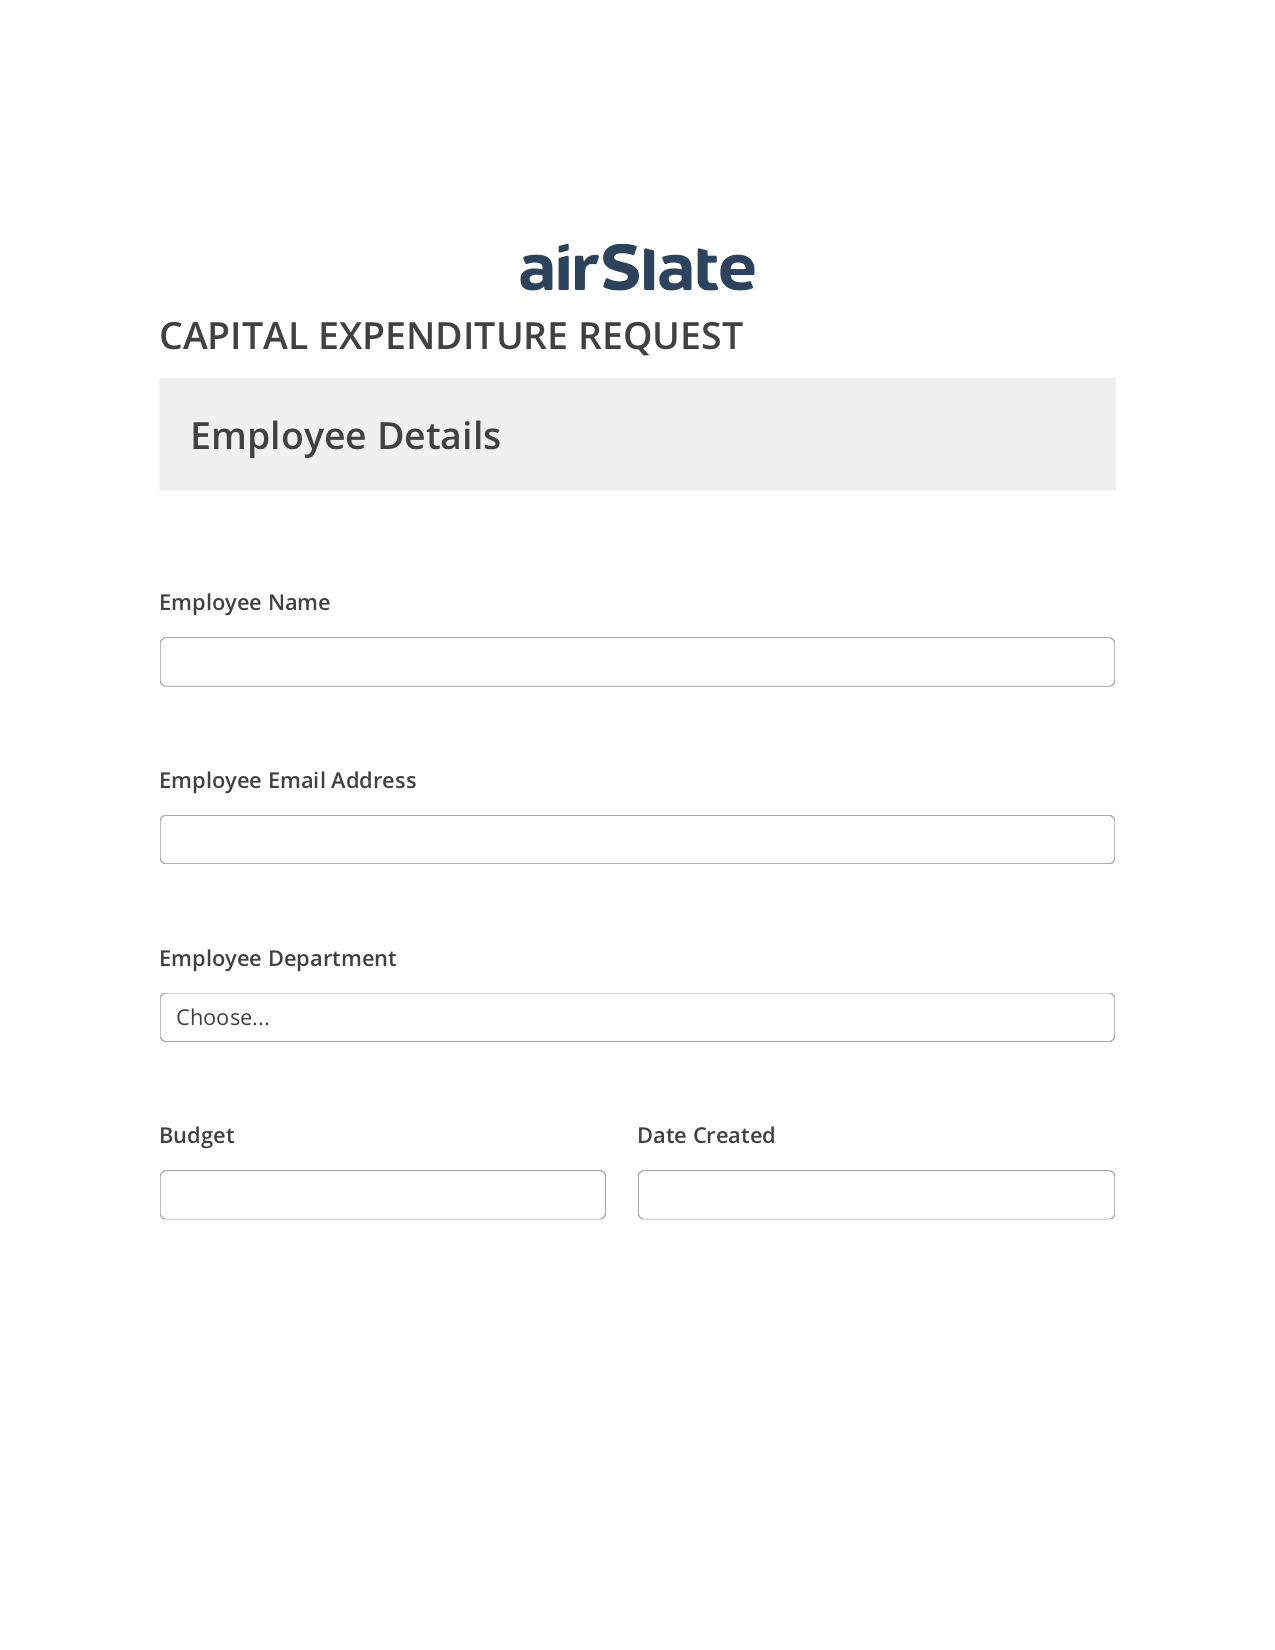 Multirole Capital Expenditure Request Approval Workflow Pre-fill from CSV File Bot, Rename Slate Bot, Archive to SharePoint Folder